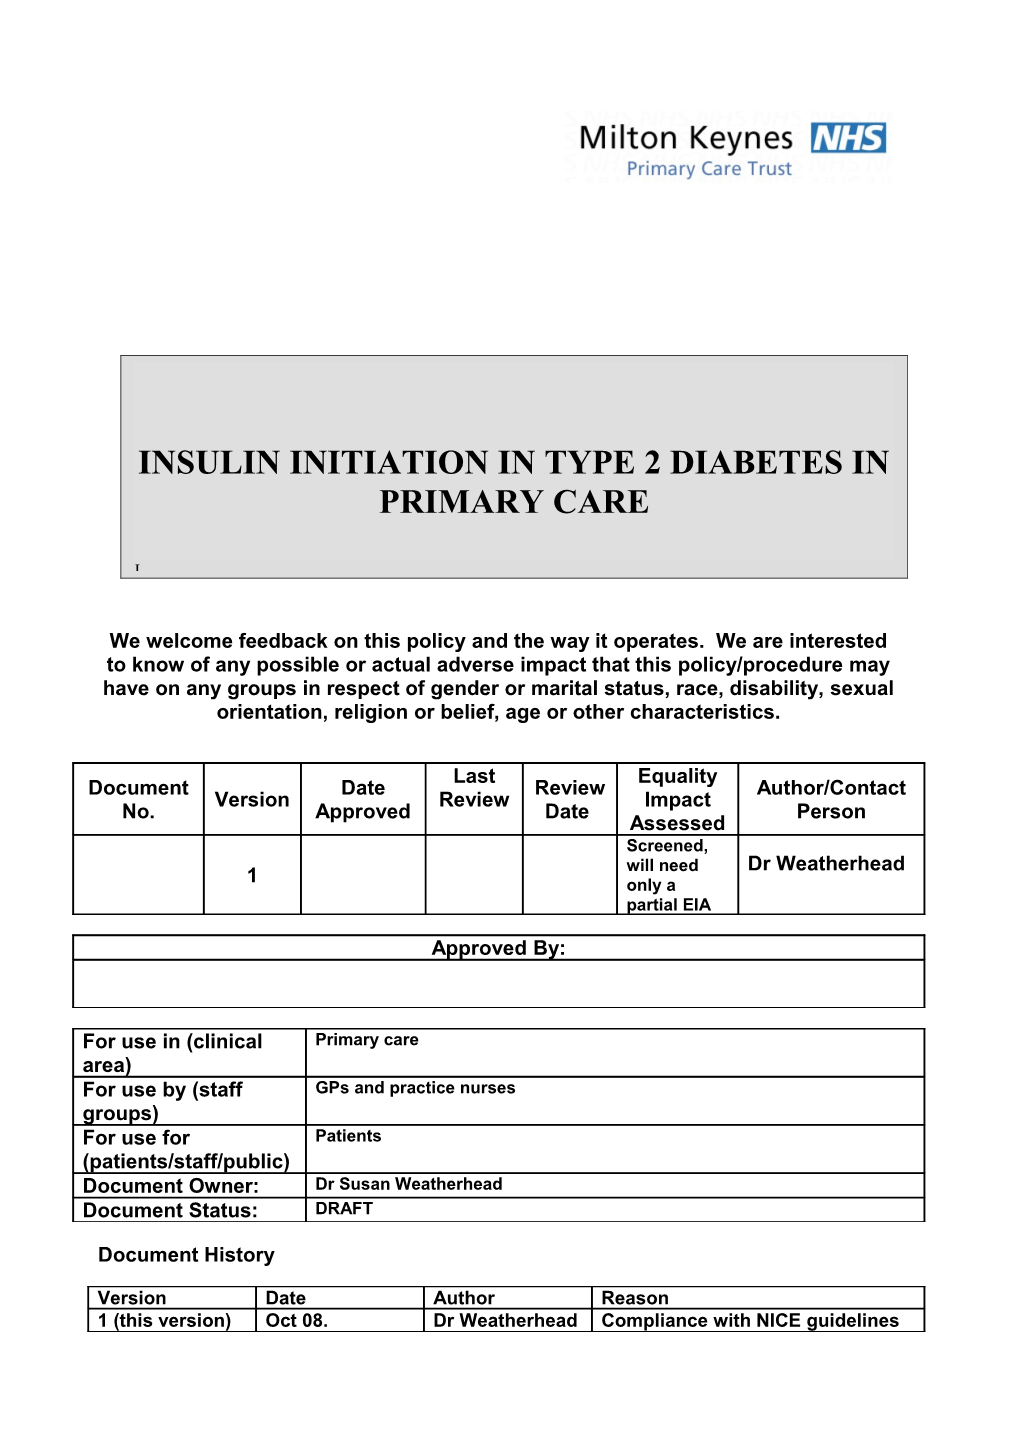 4.0Main Body of Document:Initial Assessment of Patient Requiring Insulin Therapy